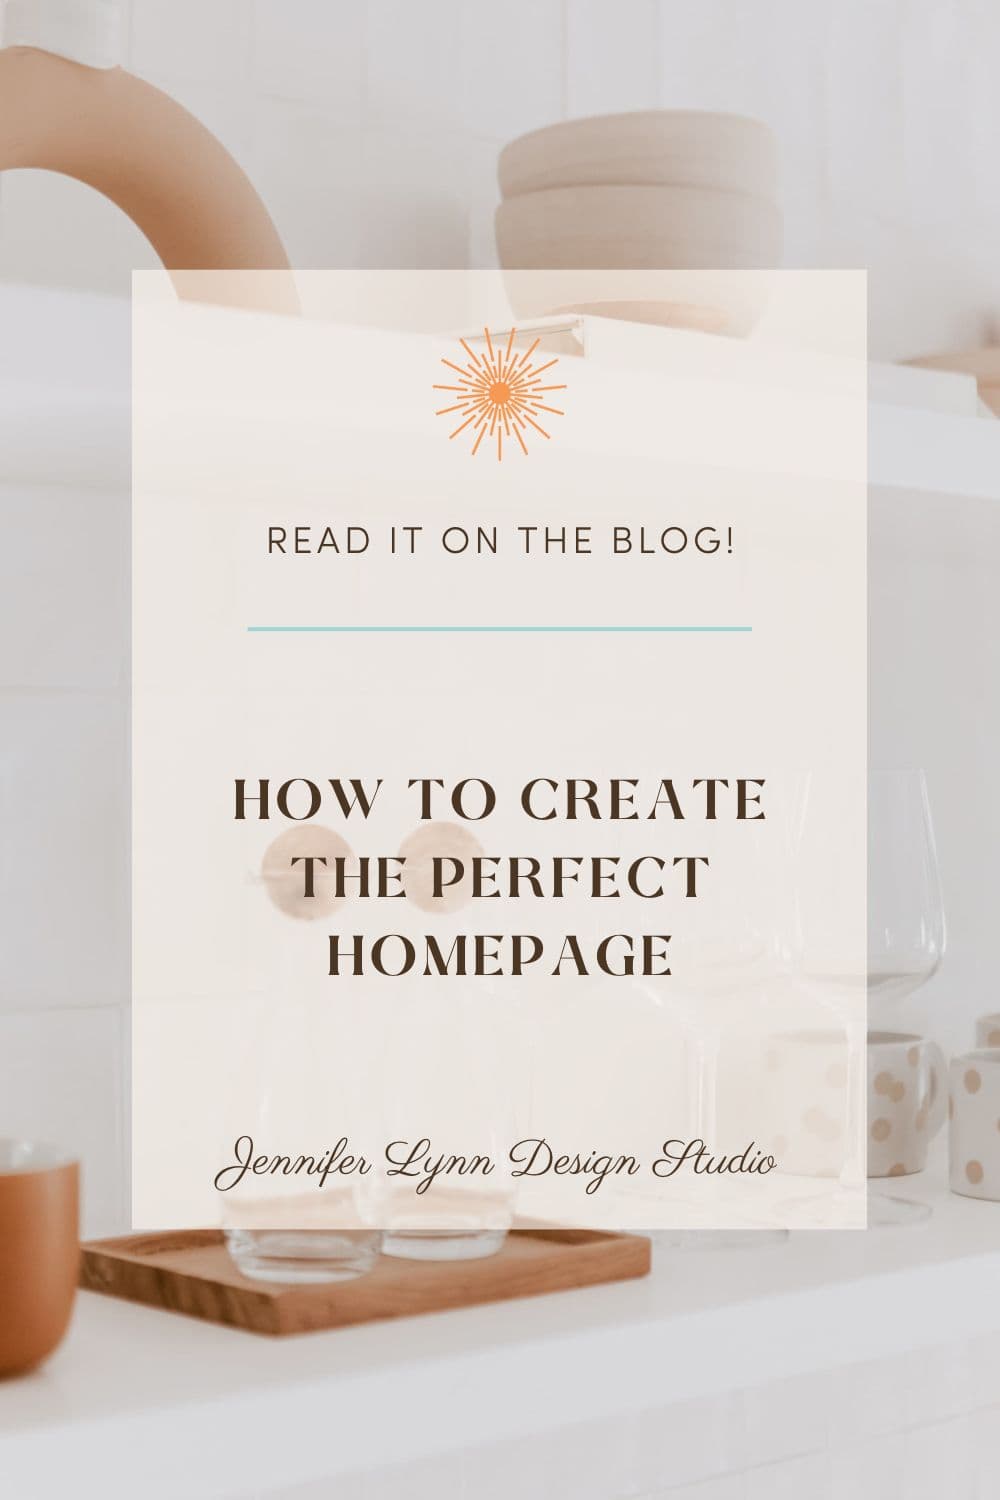 How to Create the Perfect Homepage by Jennifer Lynn Design Studio